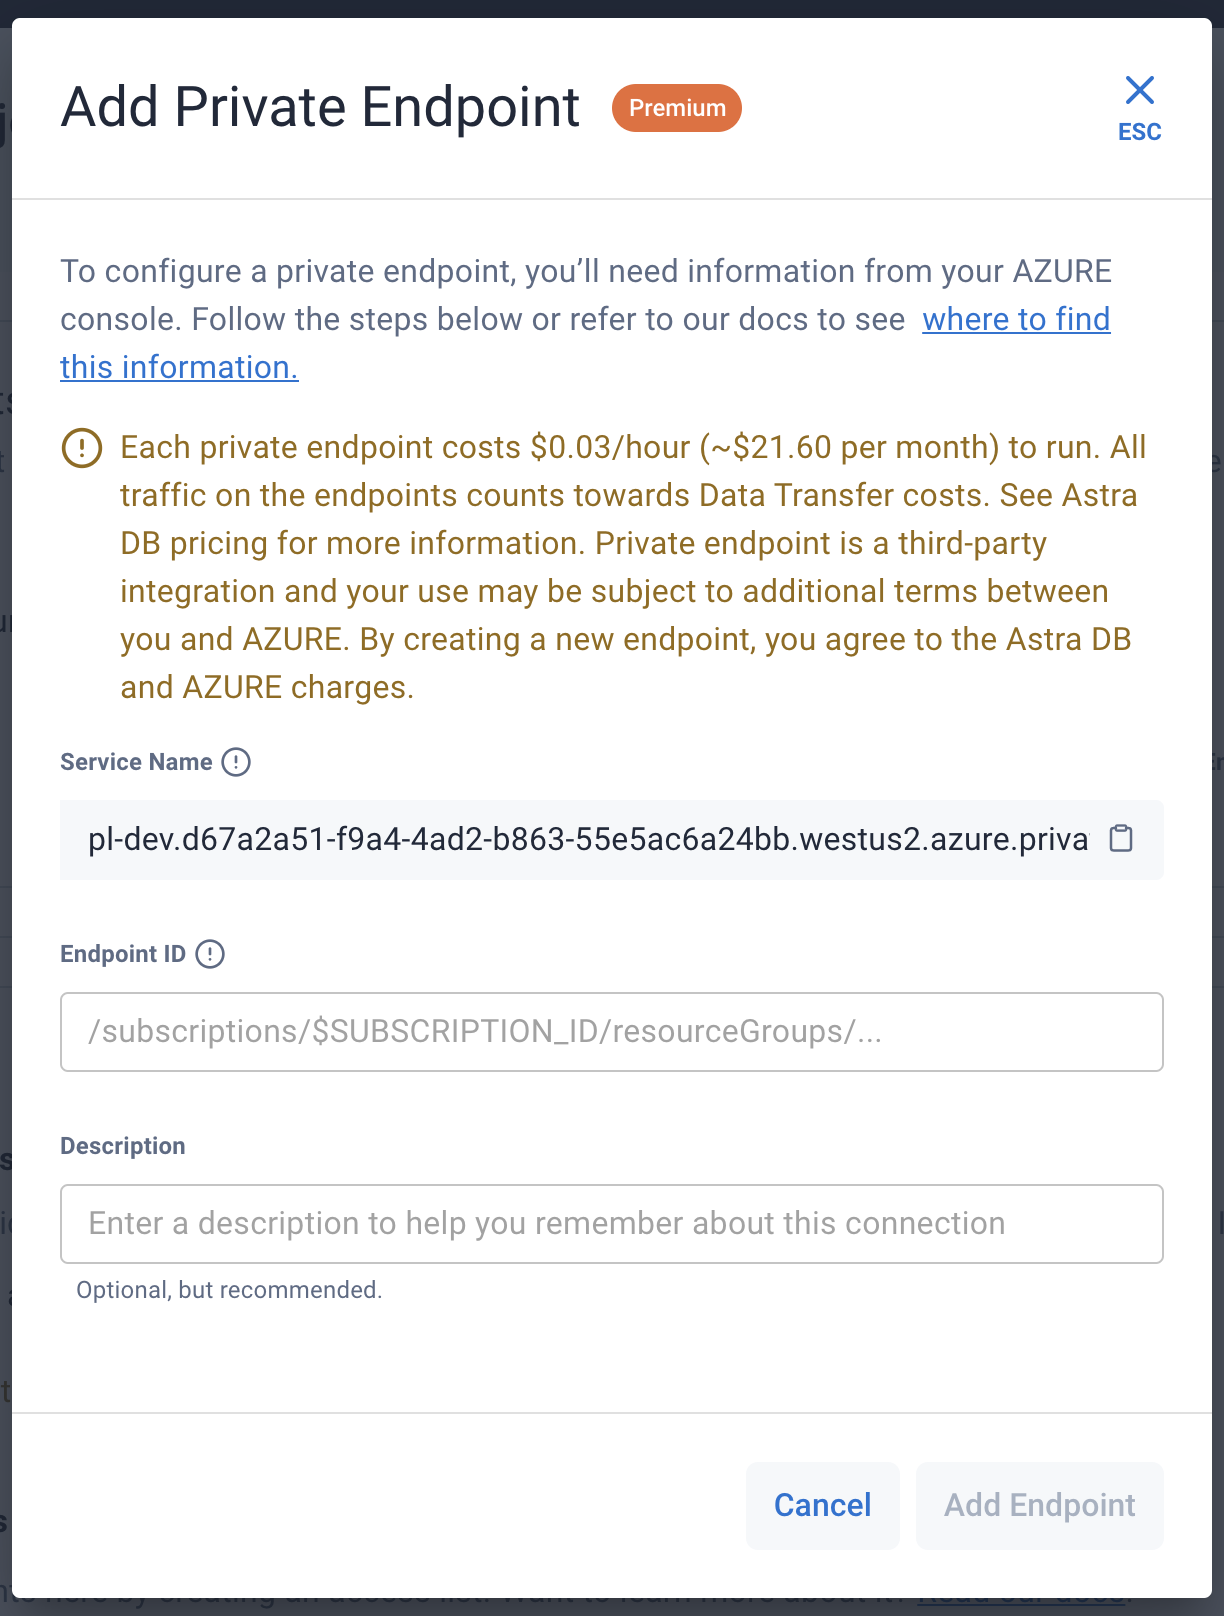 Astra DB Add Private Endpoint form with no Endpoint ID yet